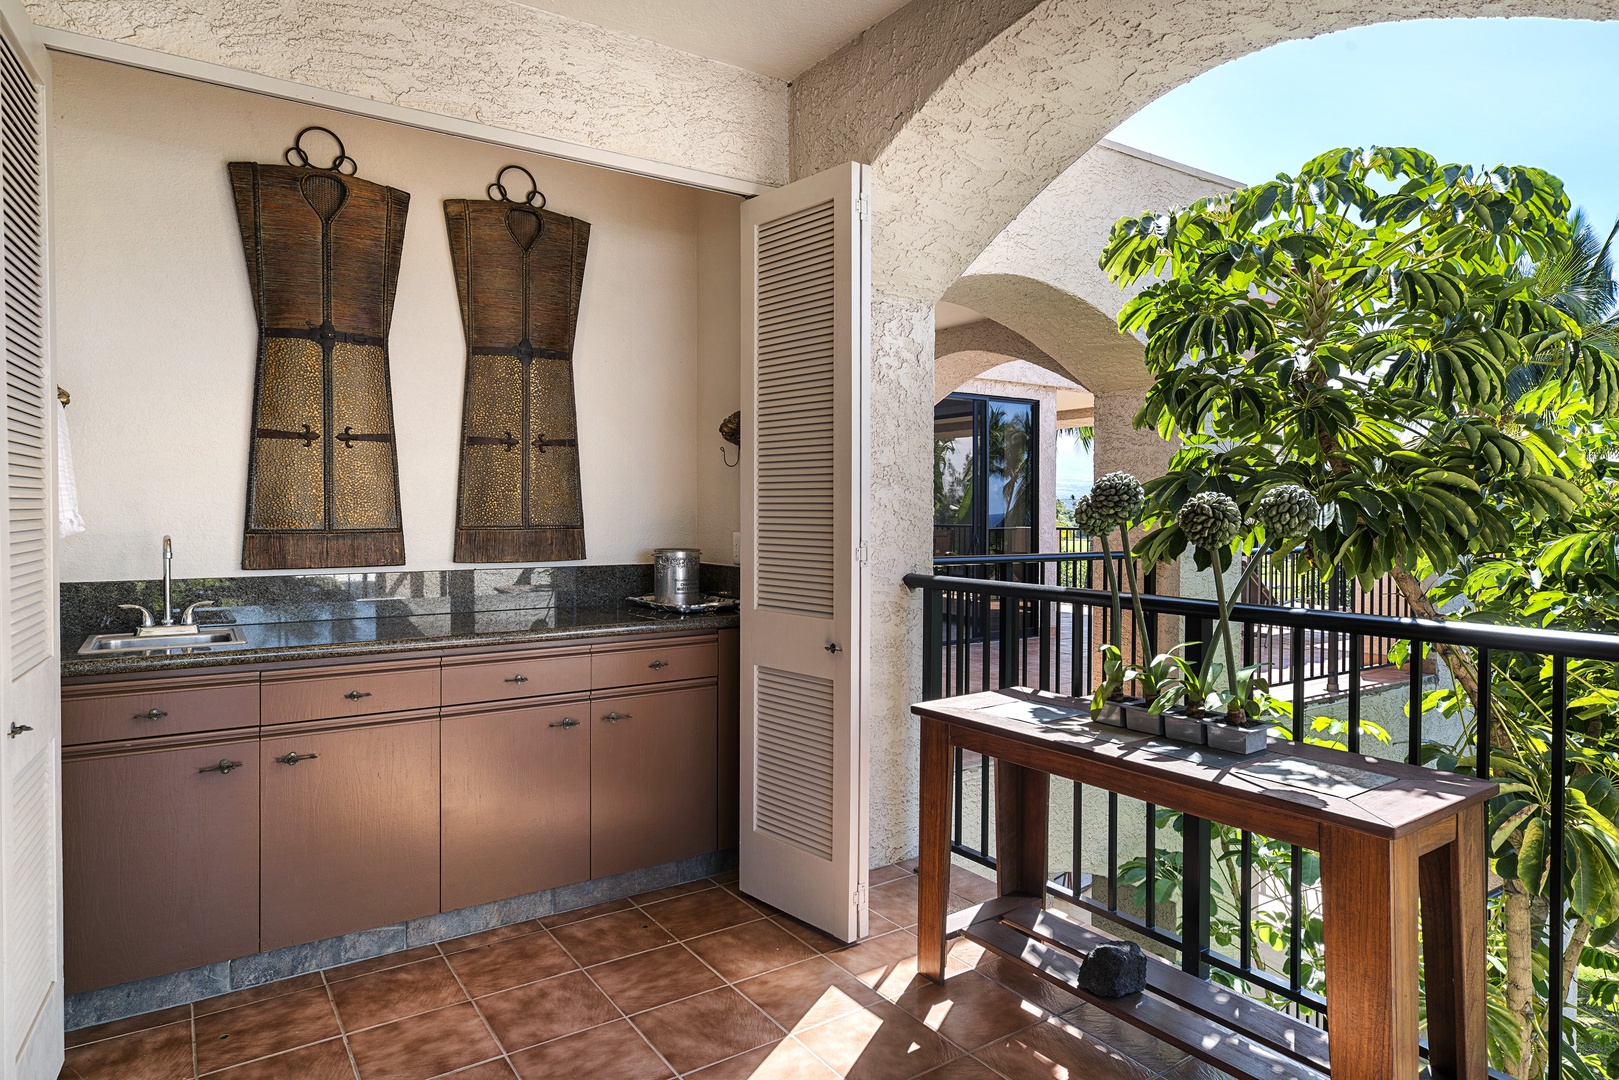 Waikoloa Vacation Rentals, Shores at Waikoloa Beach Resort 332 - Outdoor wet bar for preparing your favorite drinks!